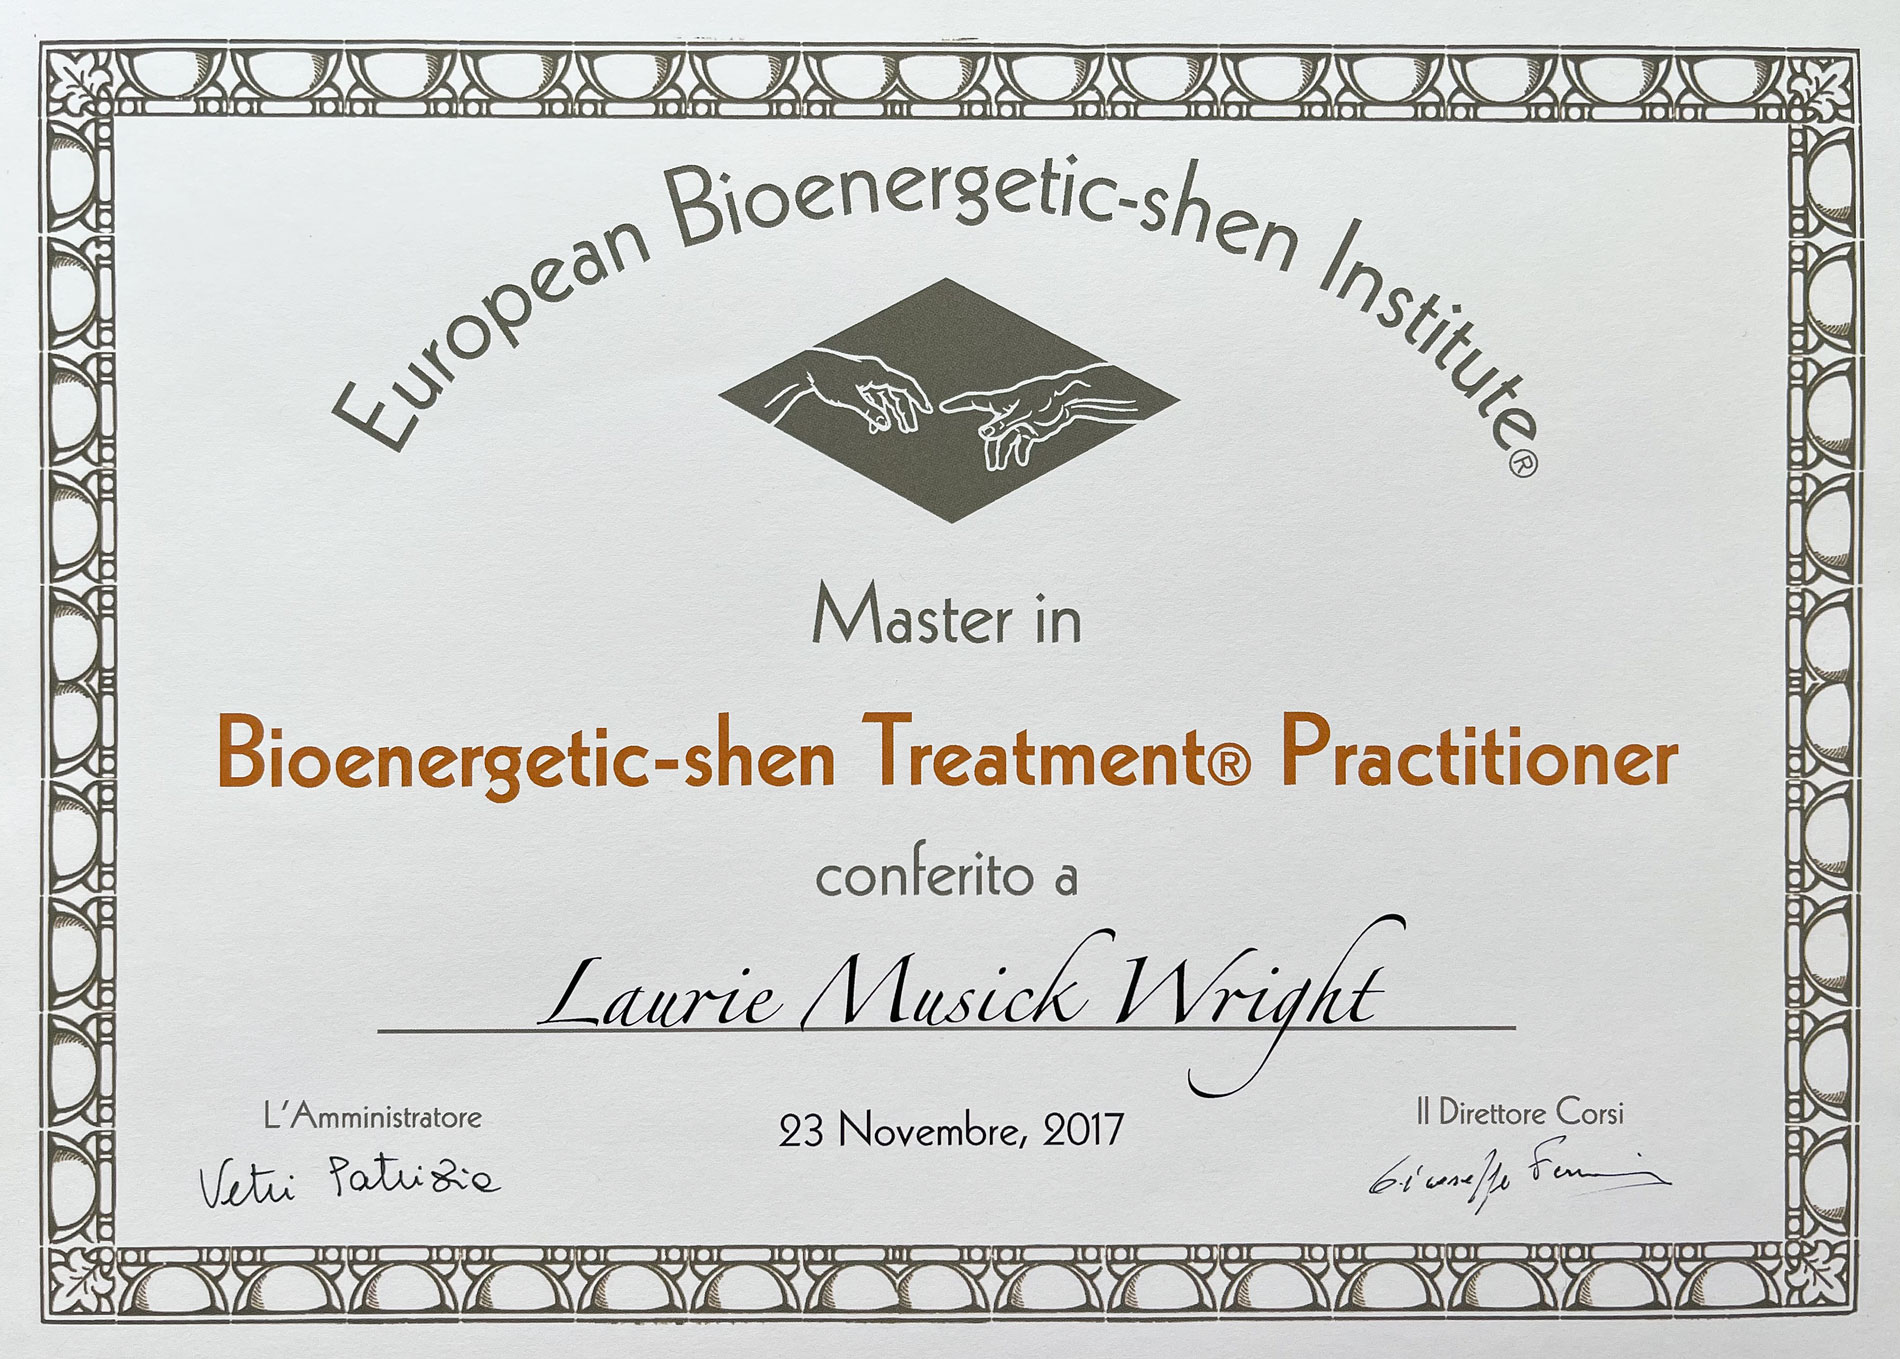 Bioenergetic-shen treatment practitioner certificate - Laurie Musick Wright